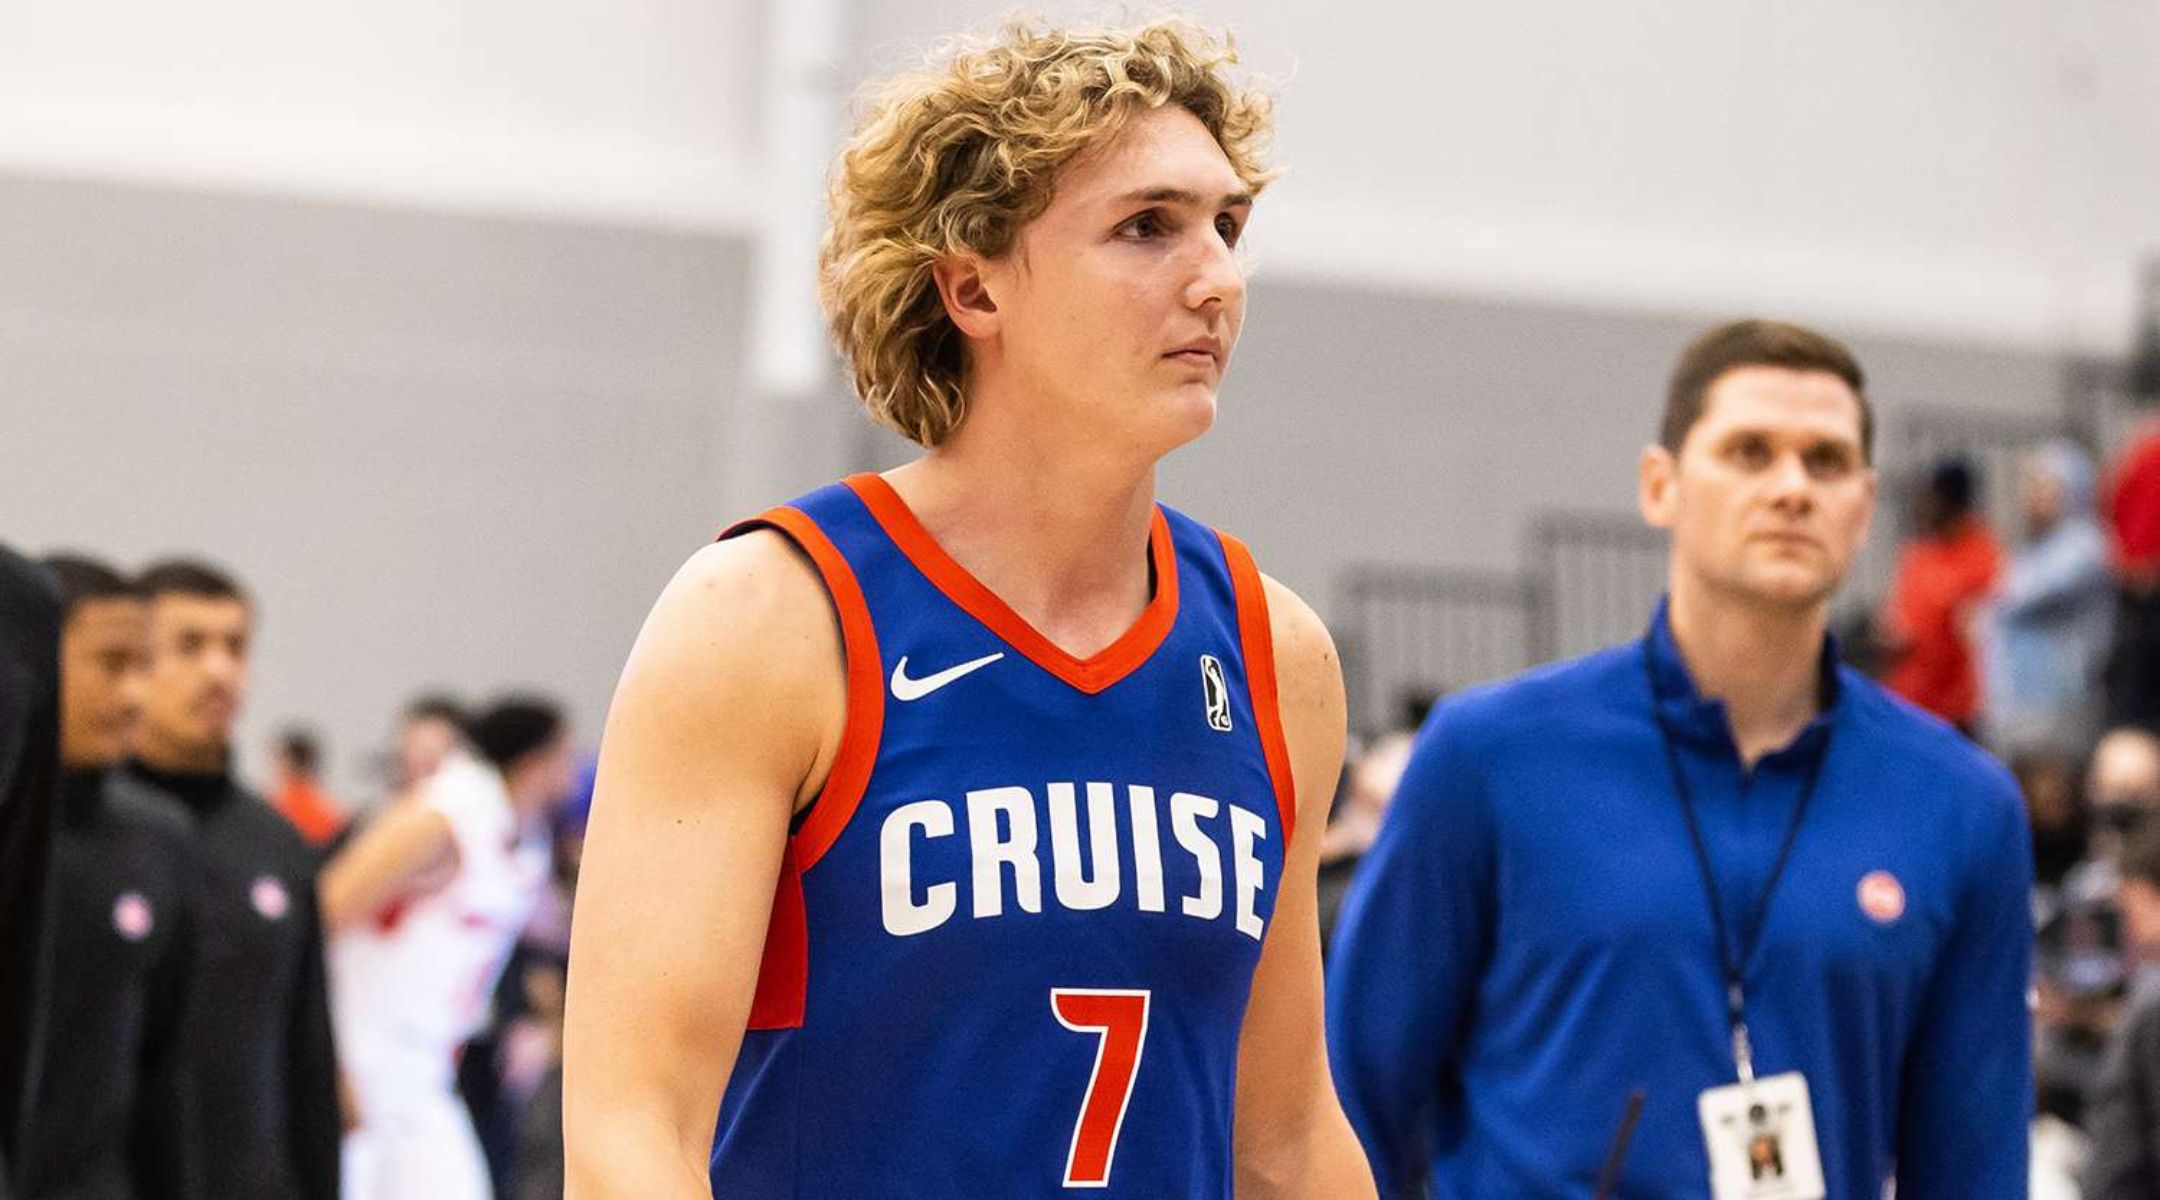 Ryan Turell played two seasons with the Motor City Cruise in the NBA's G League. (Courtesy of Motor City Cruise)